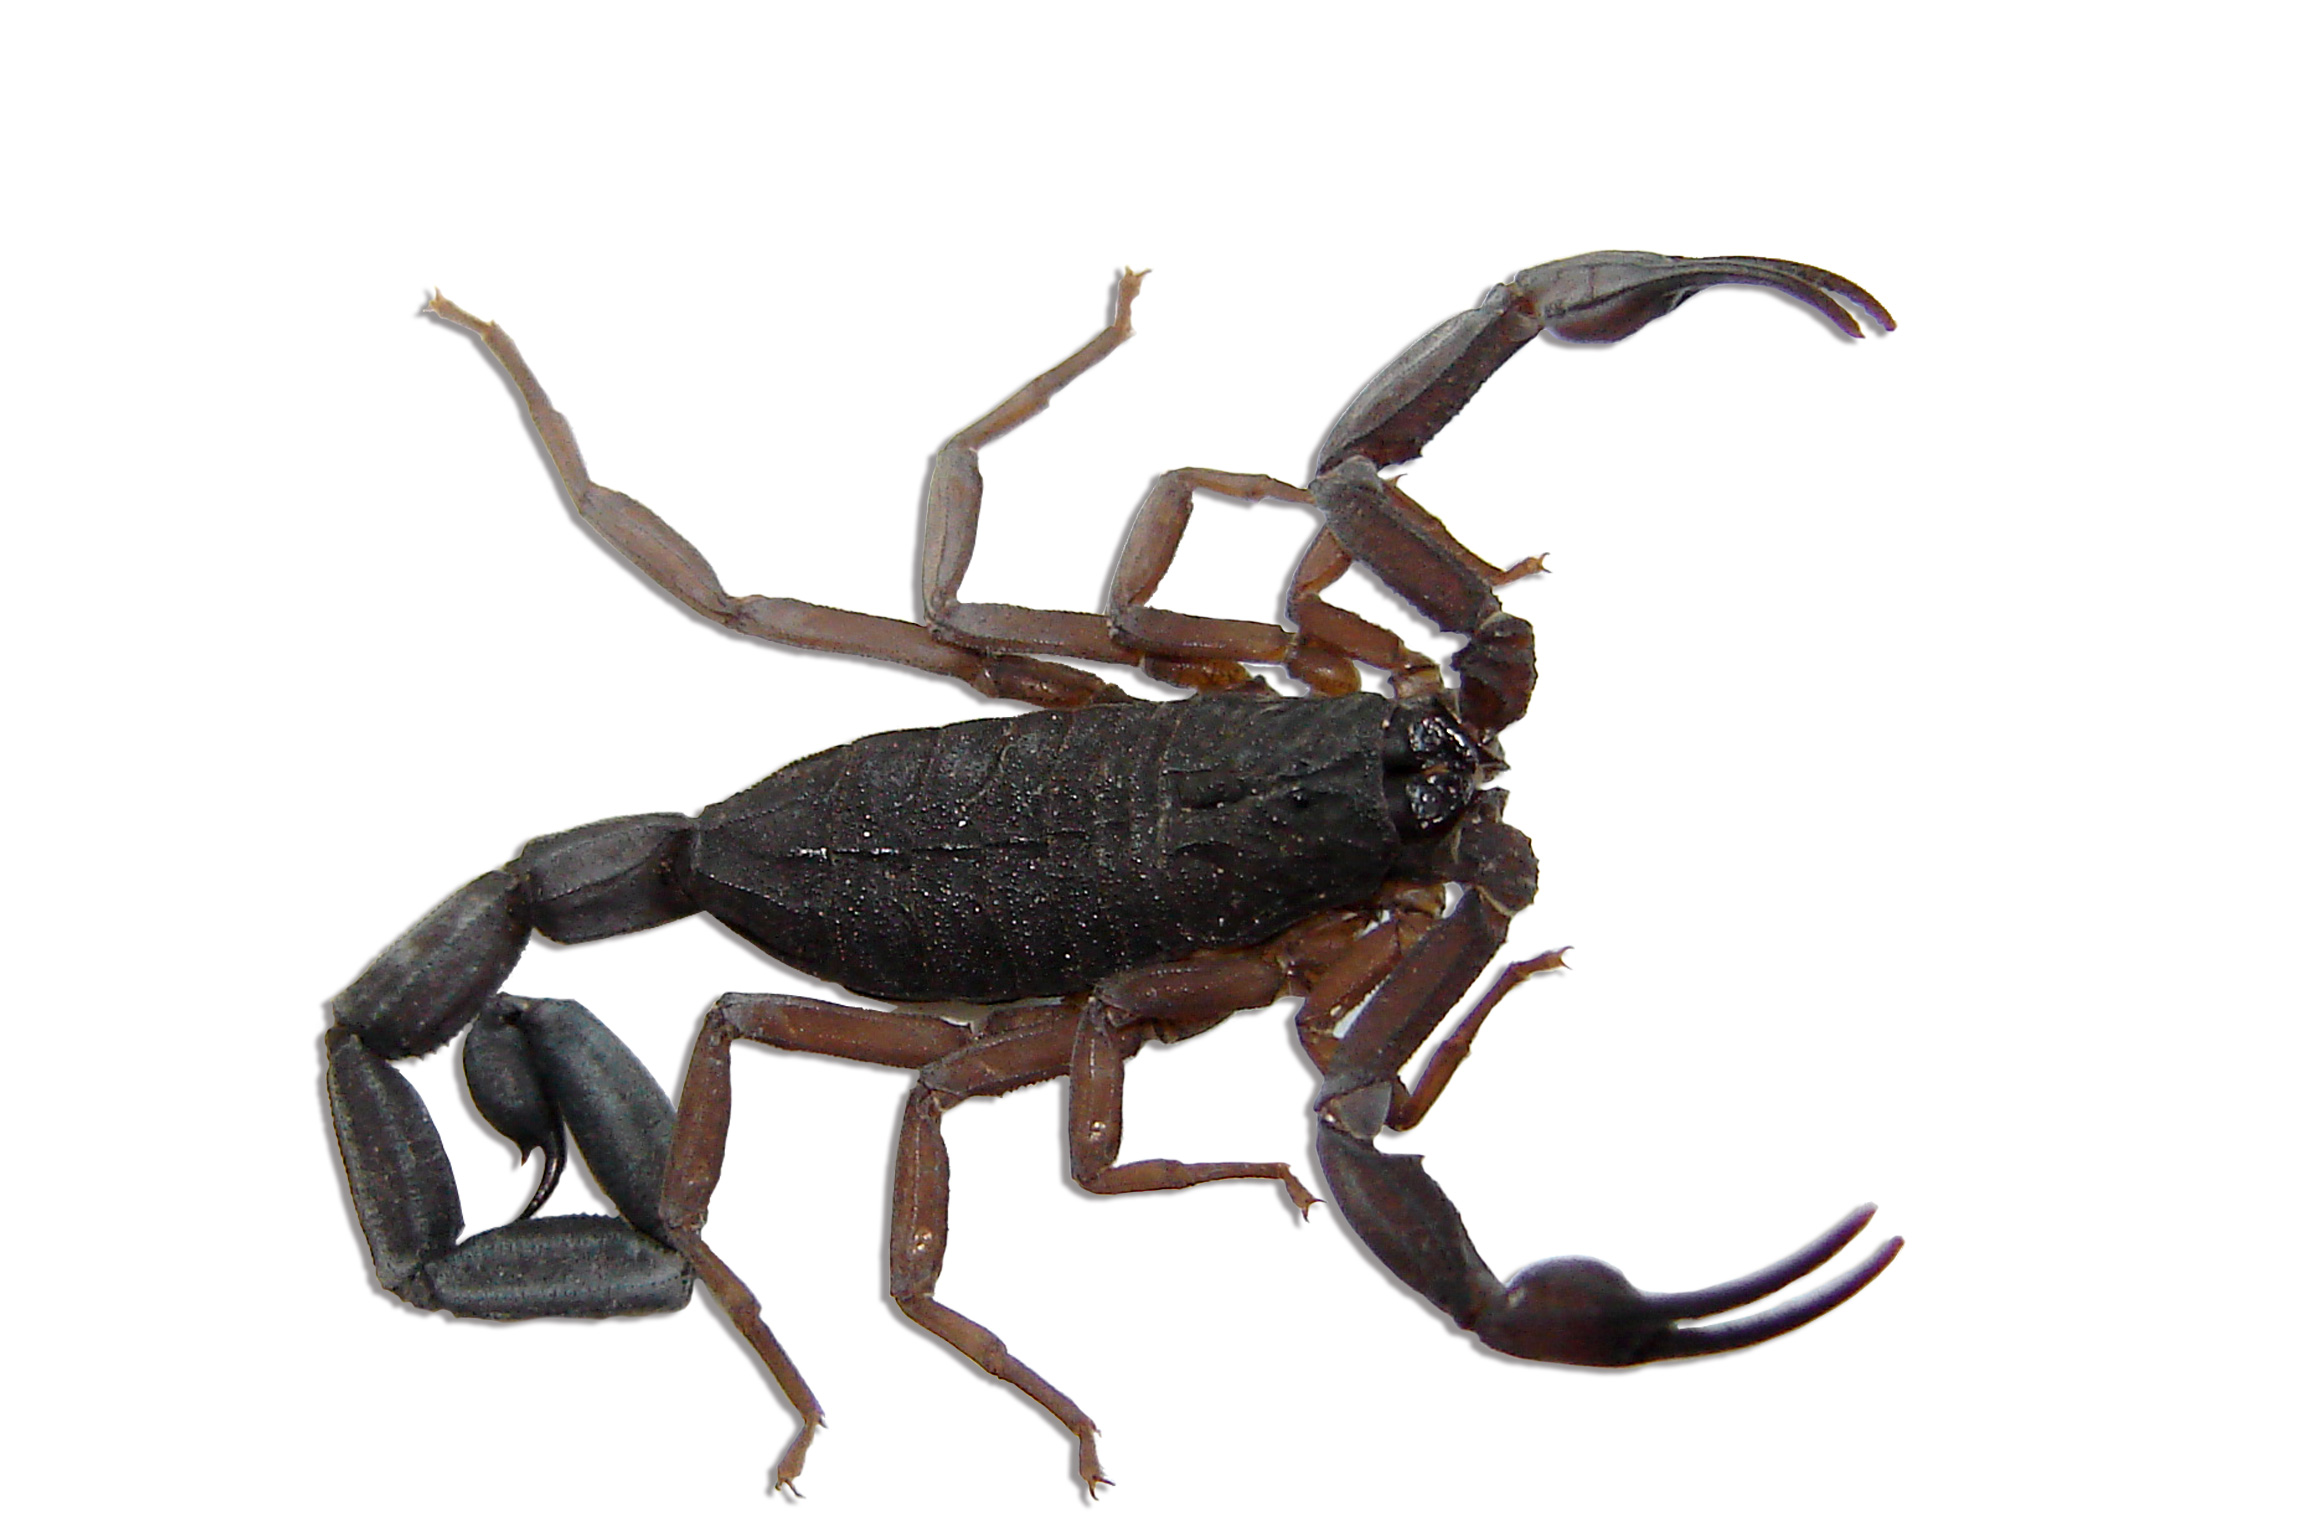 Scorpion Control Products and Supplies